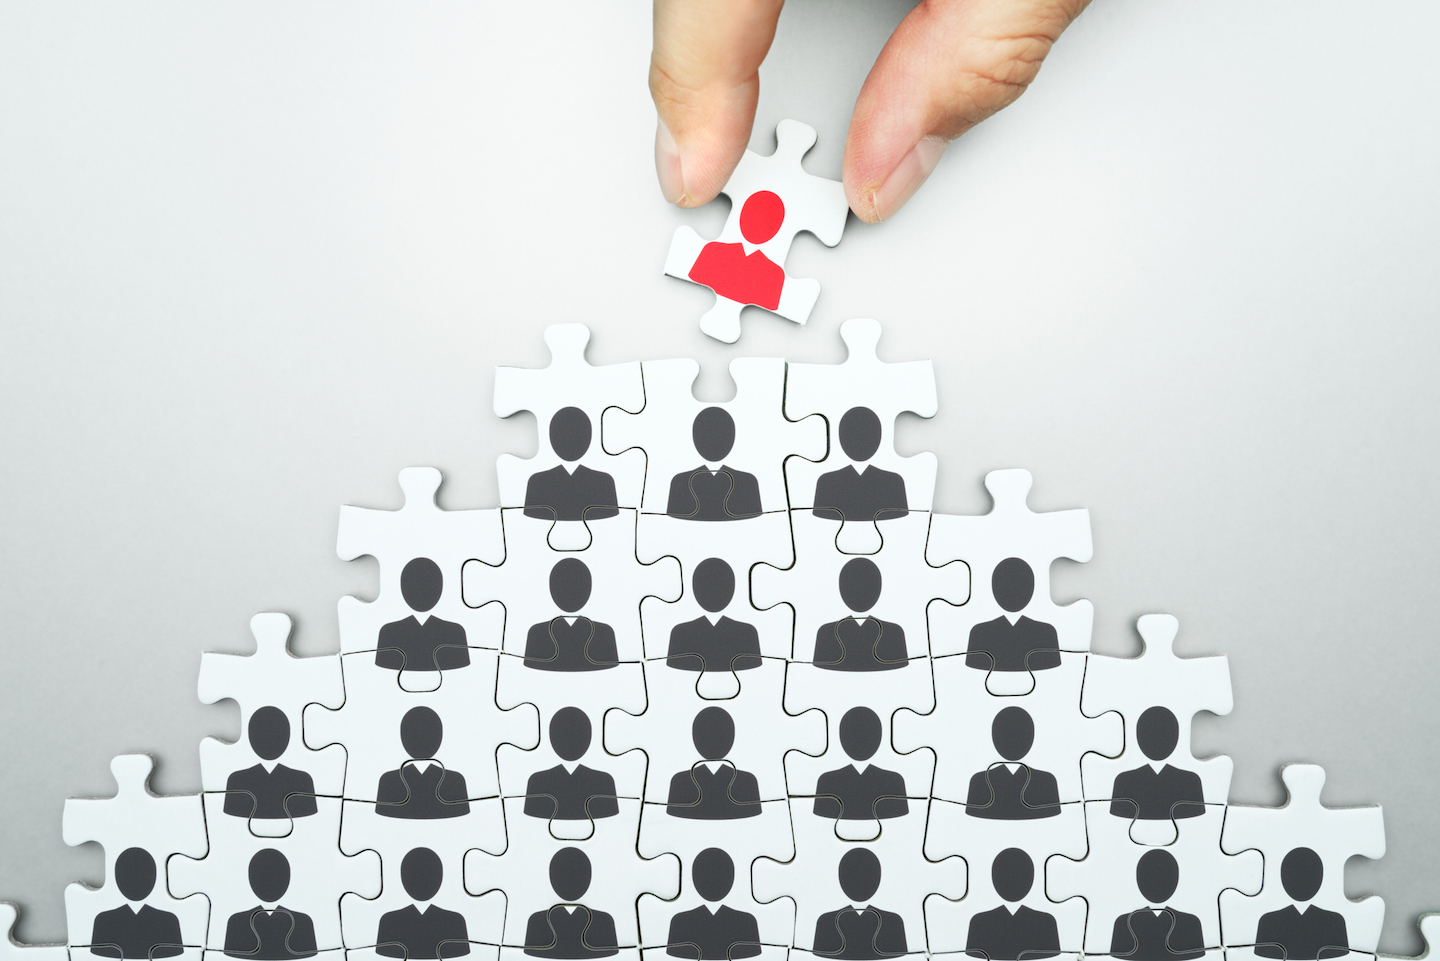 Stock image of pyramid of puzzle pieces with corporate figures on each piece.